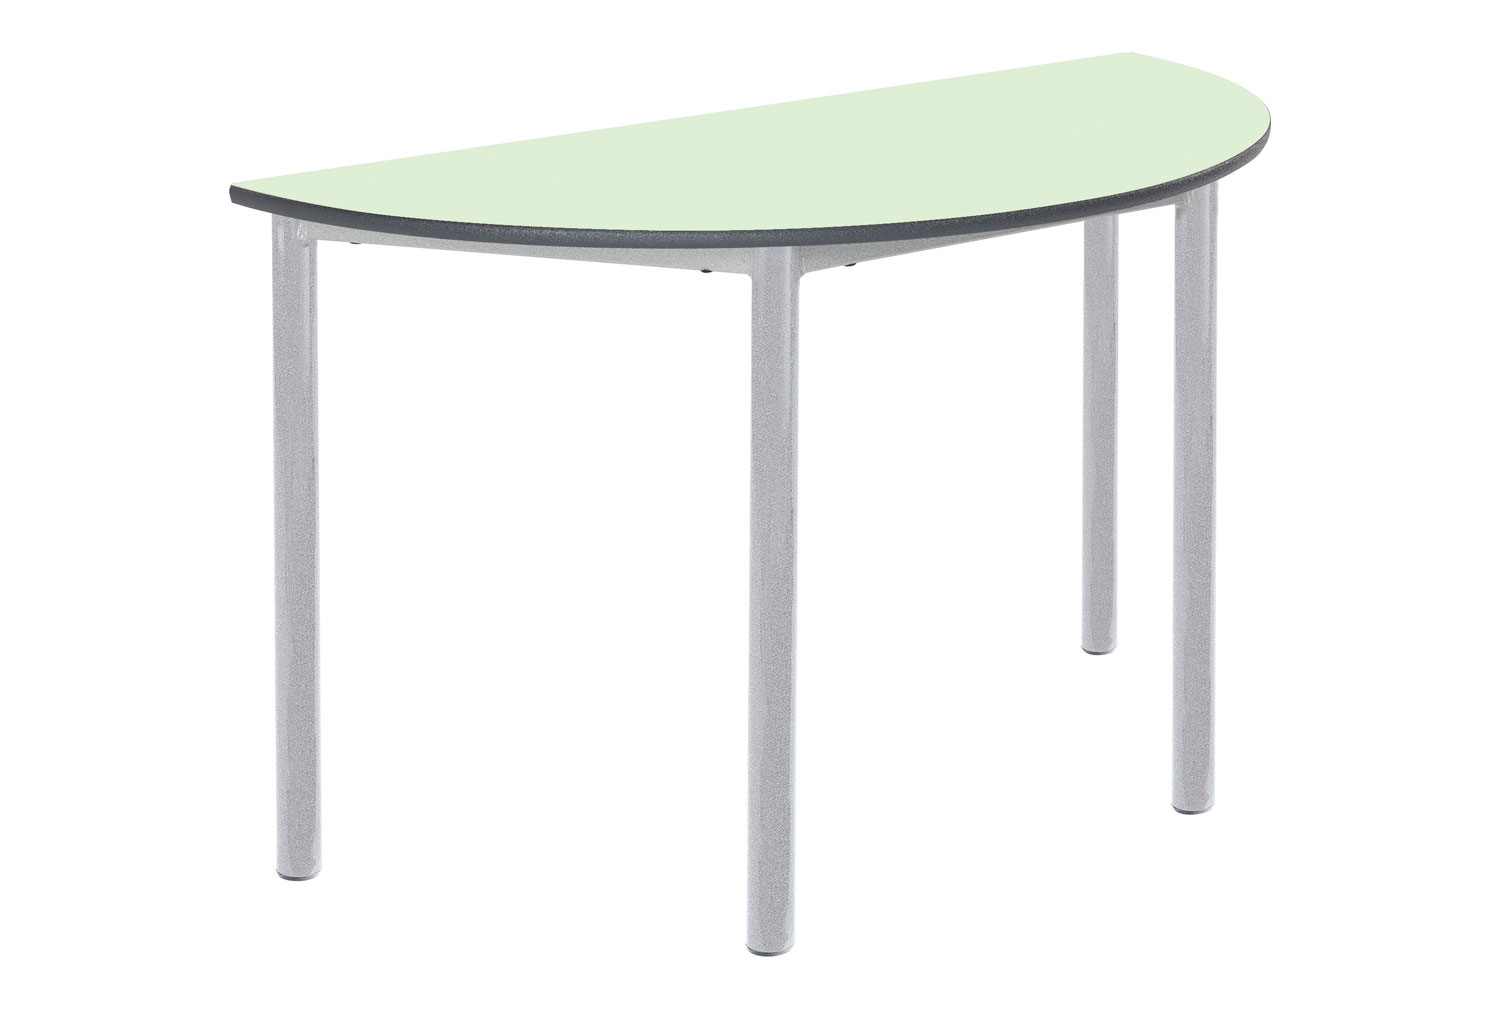 Qty 2 - RT45 Semi-Circular Classroom Tables 6-8 Years, 110wx55dx59h (cm), Speckled Grey Frame, Soft Lime Top, MDF Beech Edge